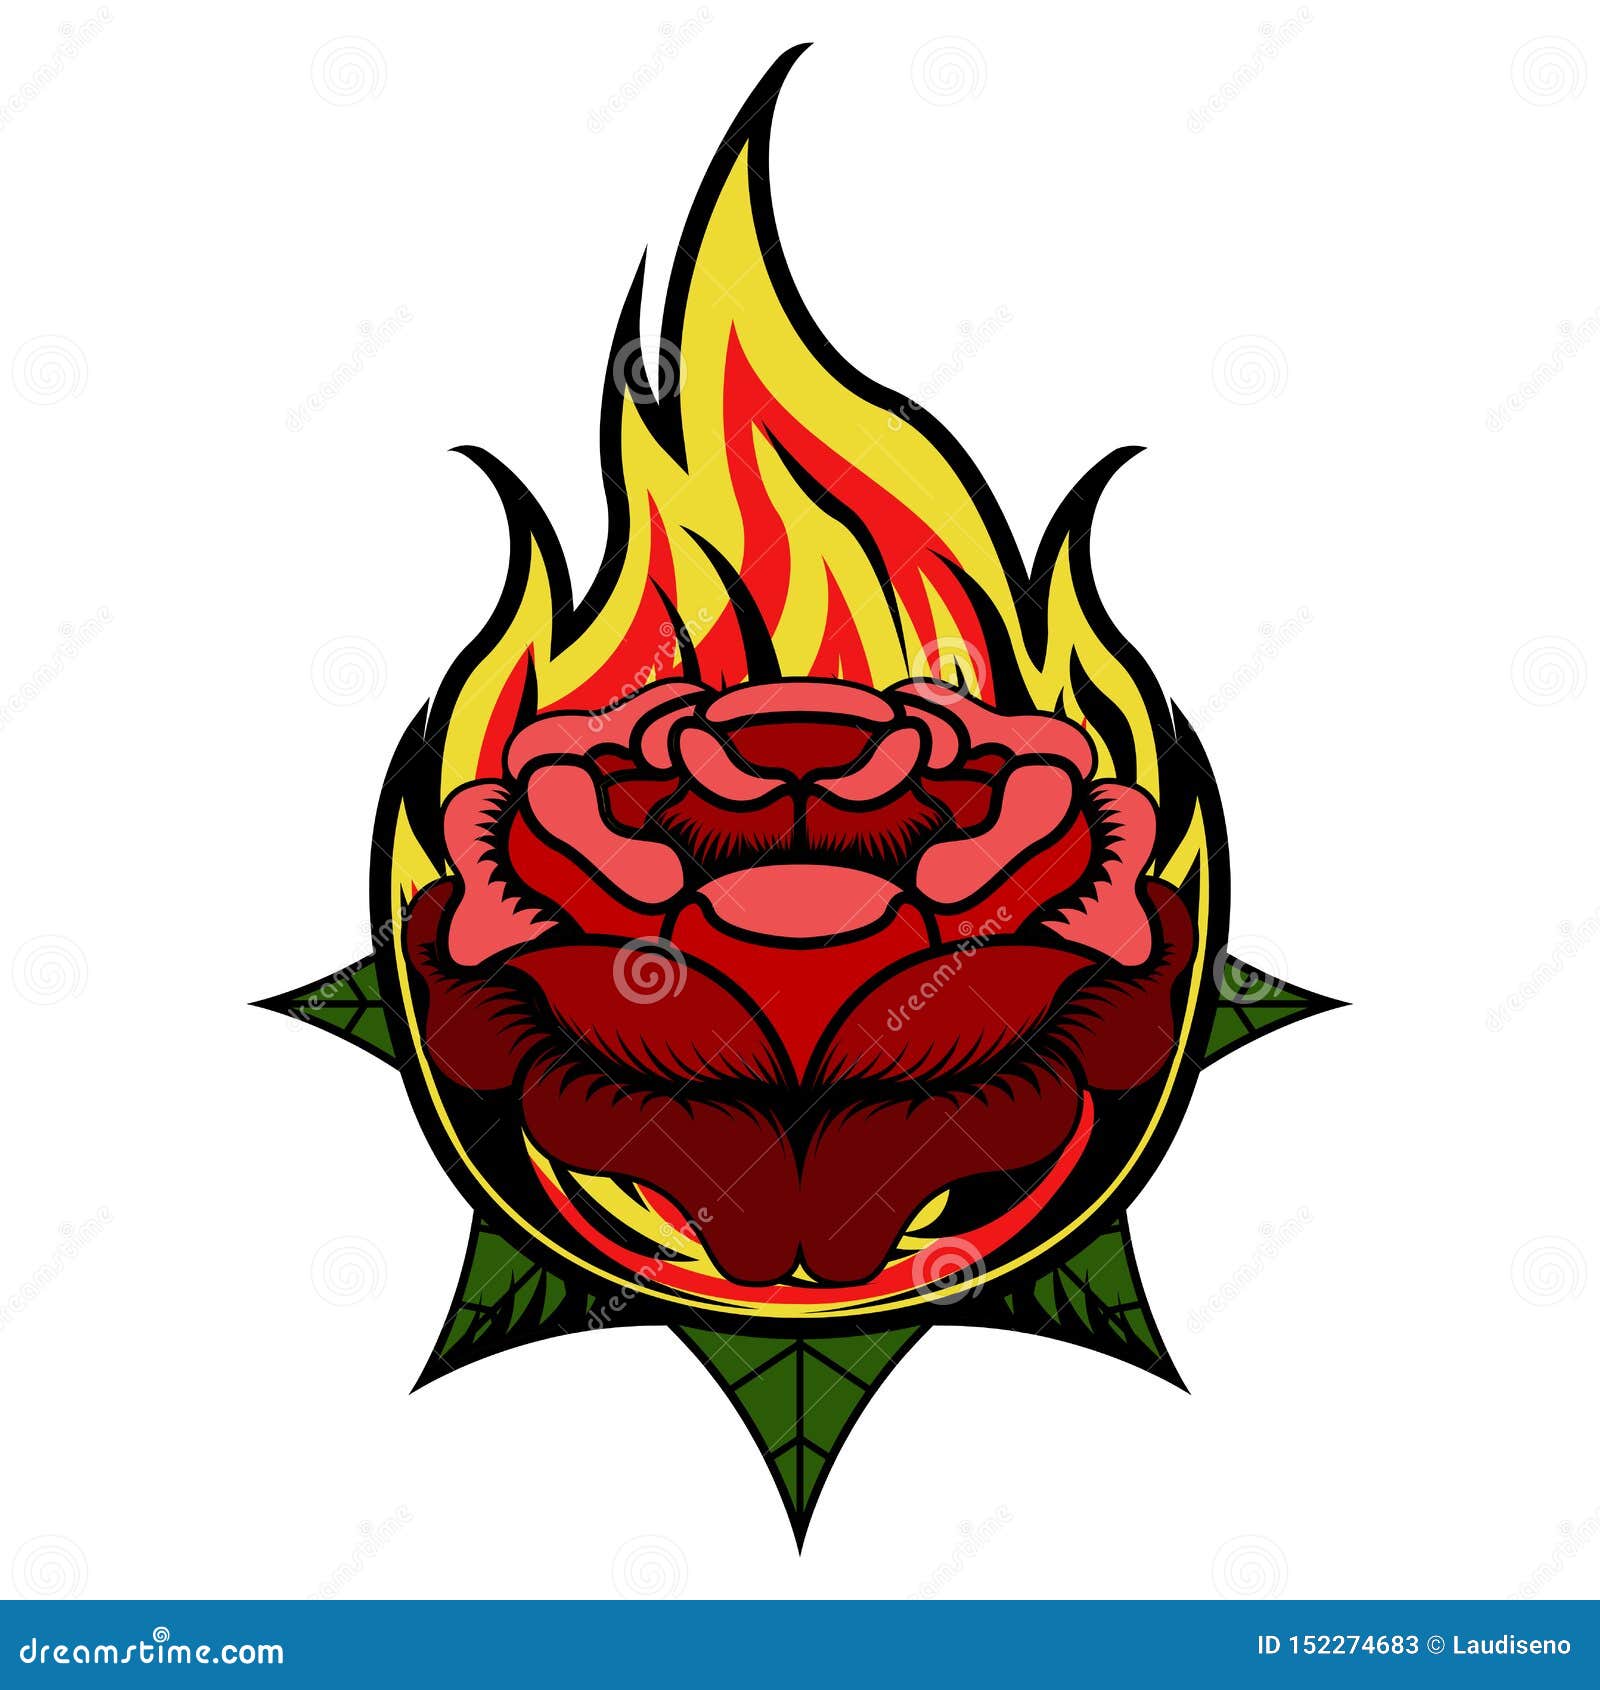 Ohana Organics  Who doesnt love a beautiful burning rose Always love  seeing what acostattoo comes up with  If your an artists check out  below repost  Tomorrow is my new